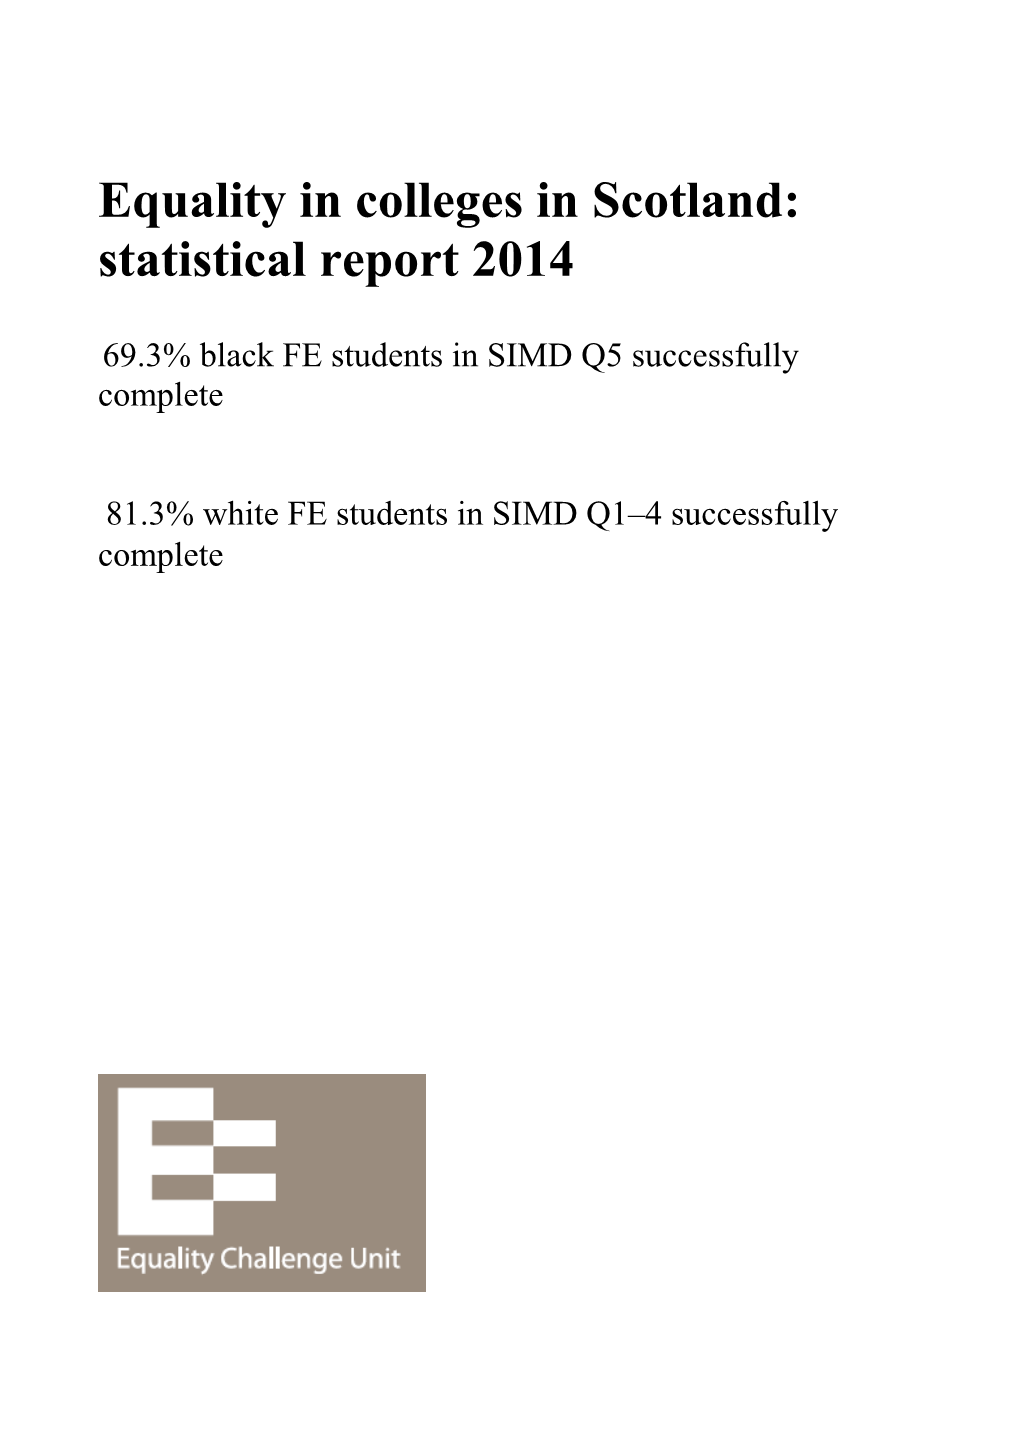 Equality in Colleges in Scotland: Statistical Report 2014